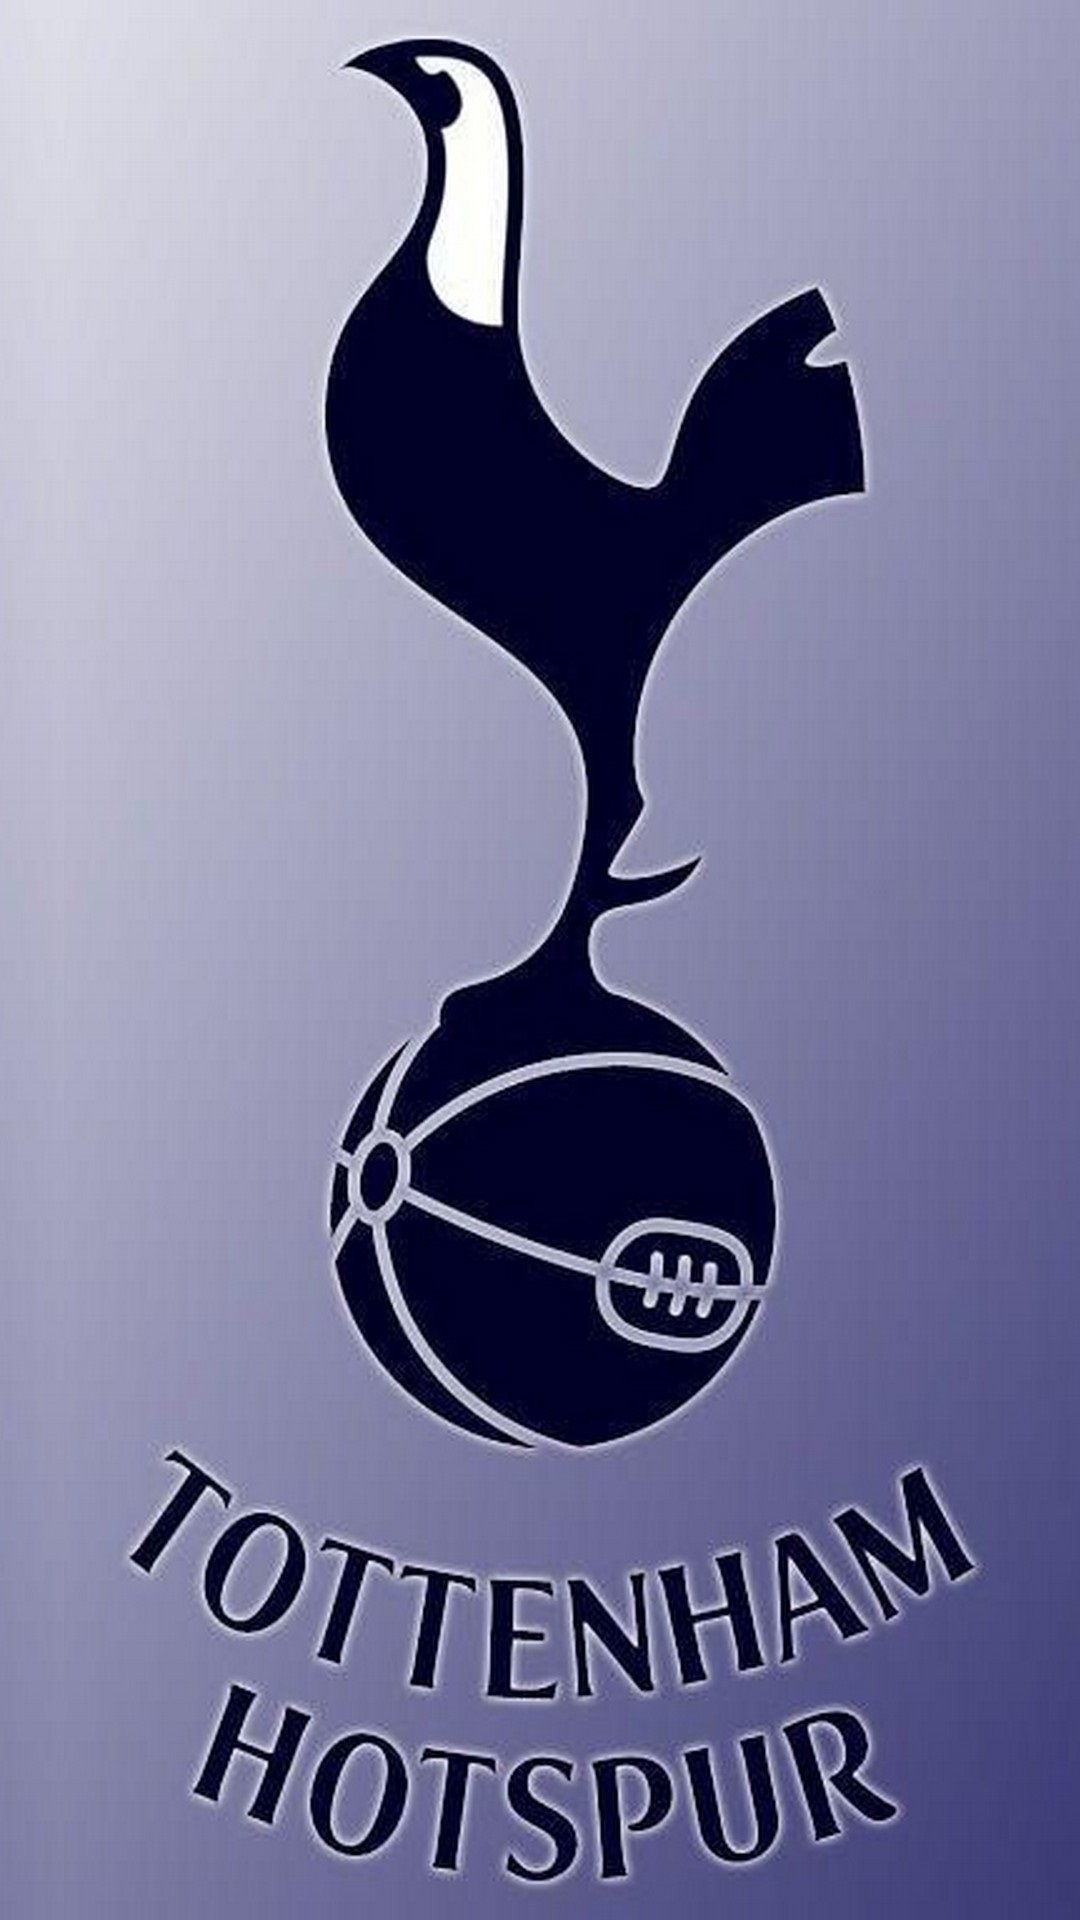 Mobile Wallpapers Tottenham Hotspur With high-resolution 1080X1920 pixel. You can use this wallpaper for your iPhone 5, 6, 7, 8, X, XS, XR backgrounds, Mobile Screensaver, or iPad Lock Screen